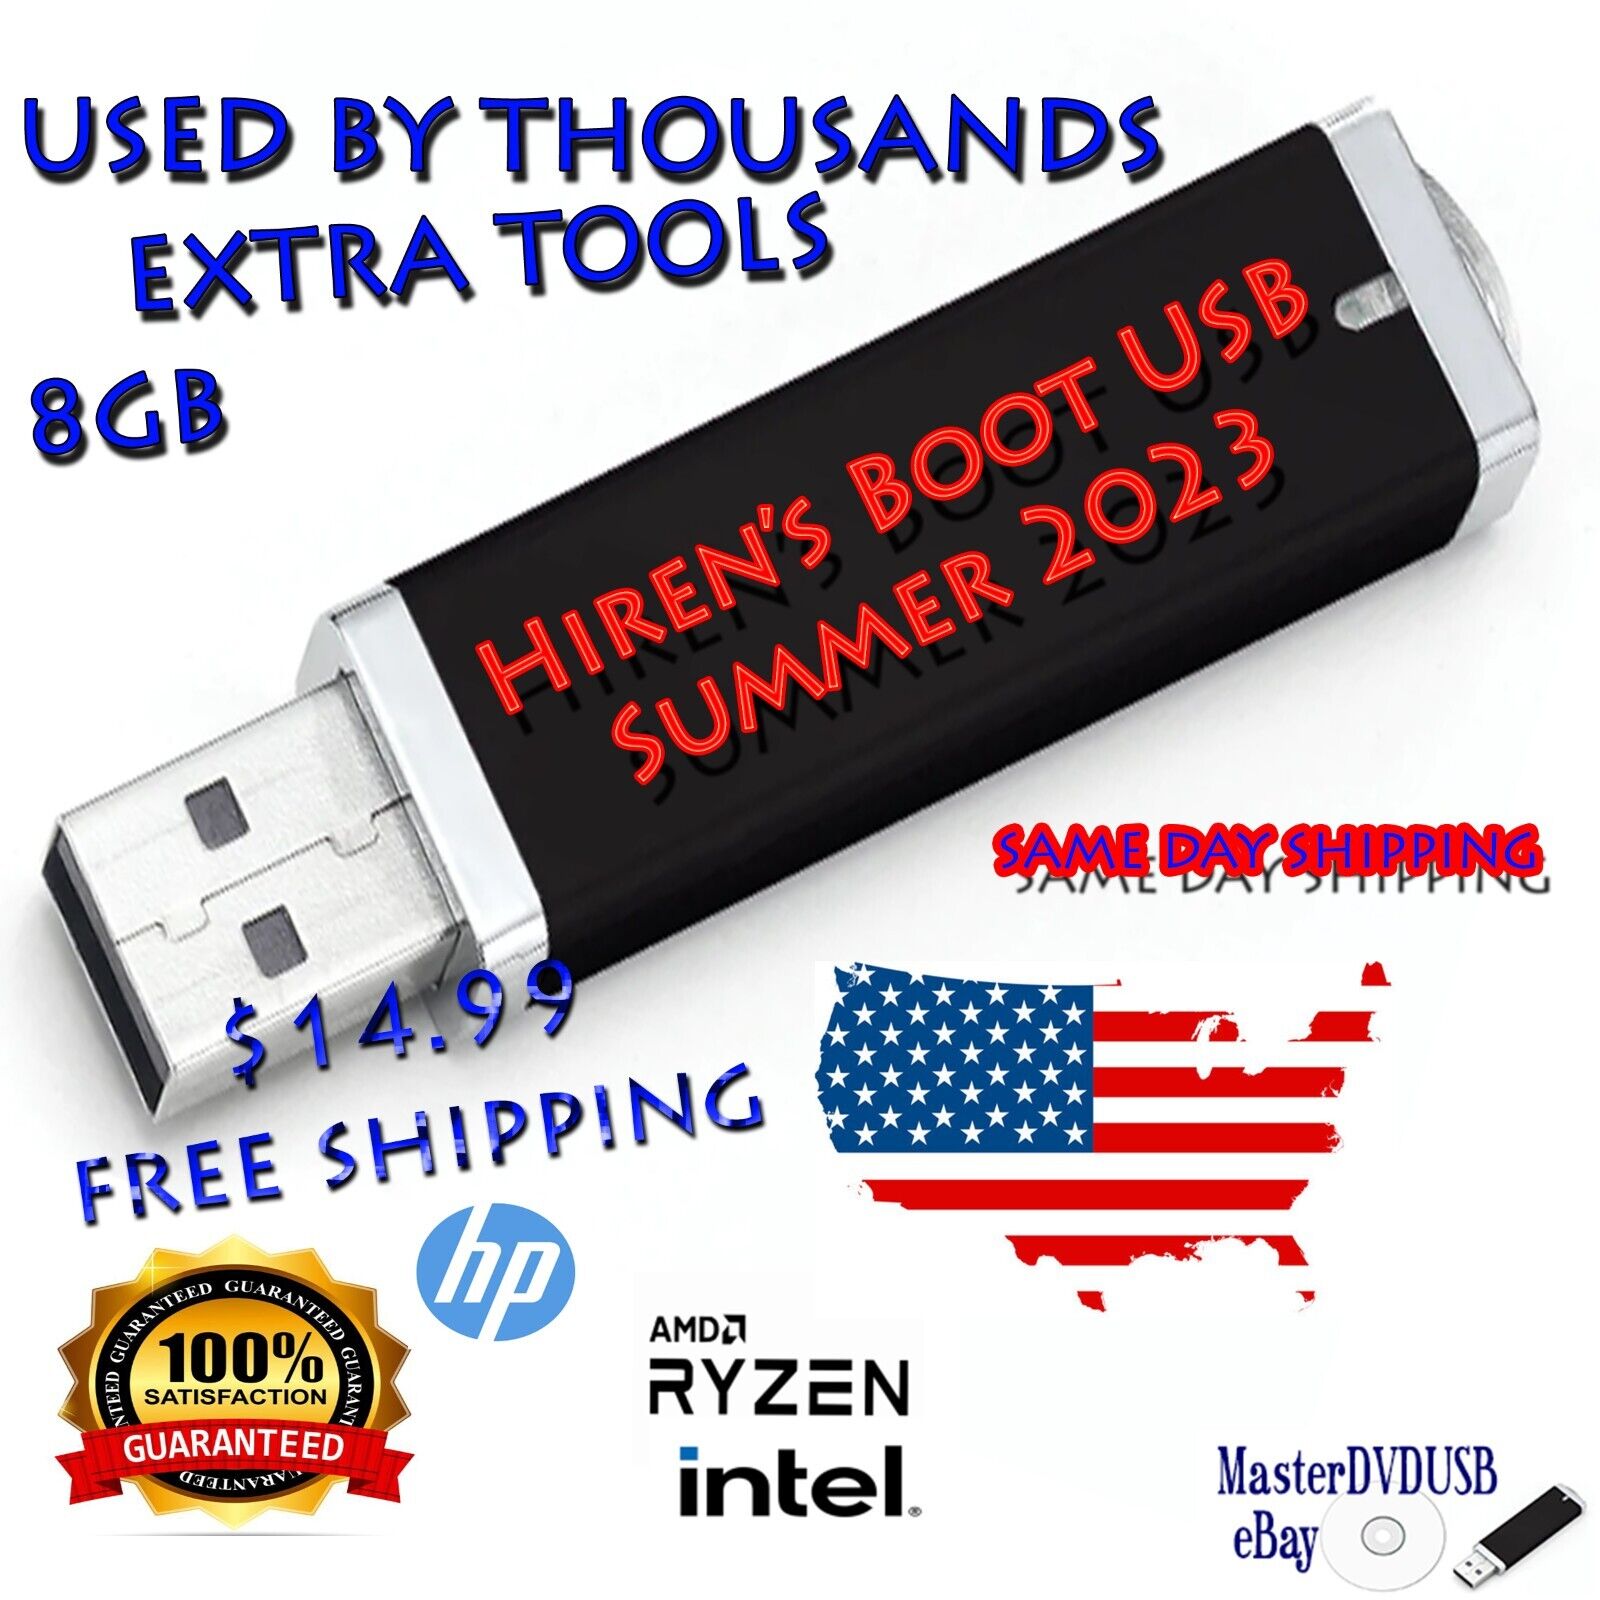 Hiren’s BOOT USB 2023 With Extra Tools 8GB Best Value on eBay FAST SHIPPING USA